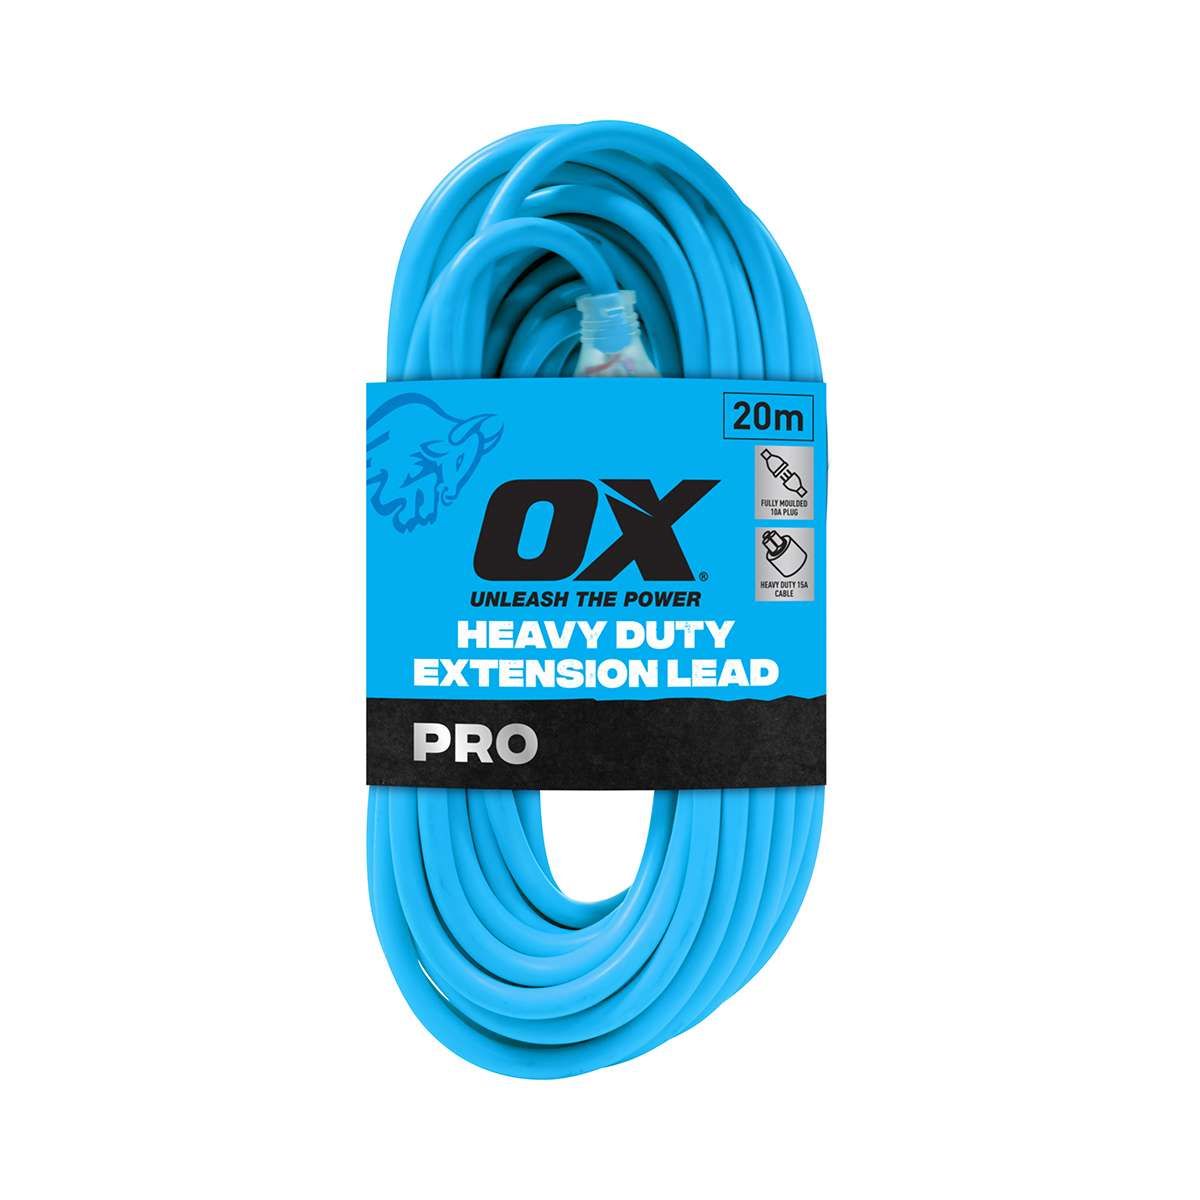 15Amp Lead & 10Amp Plug 20m Heavy Duty Extension Lead OX-P311720 by Ox